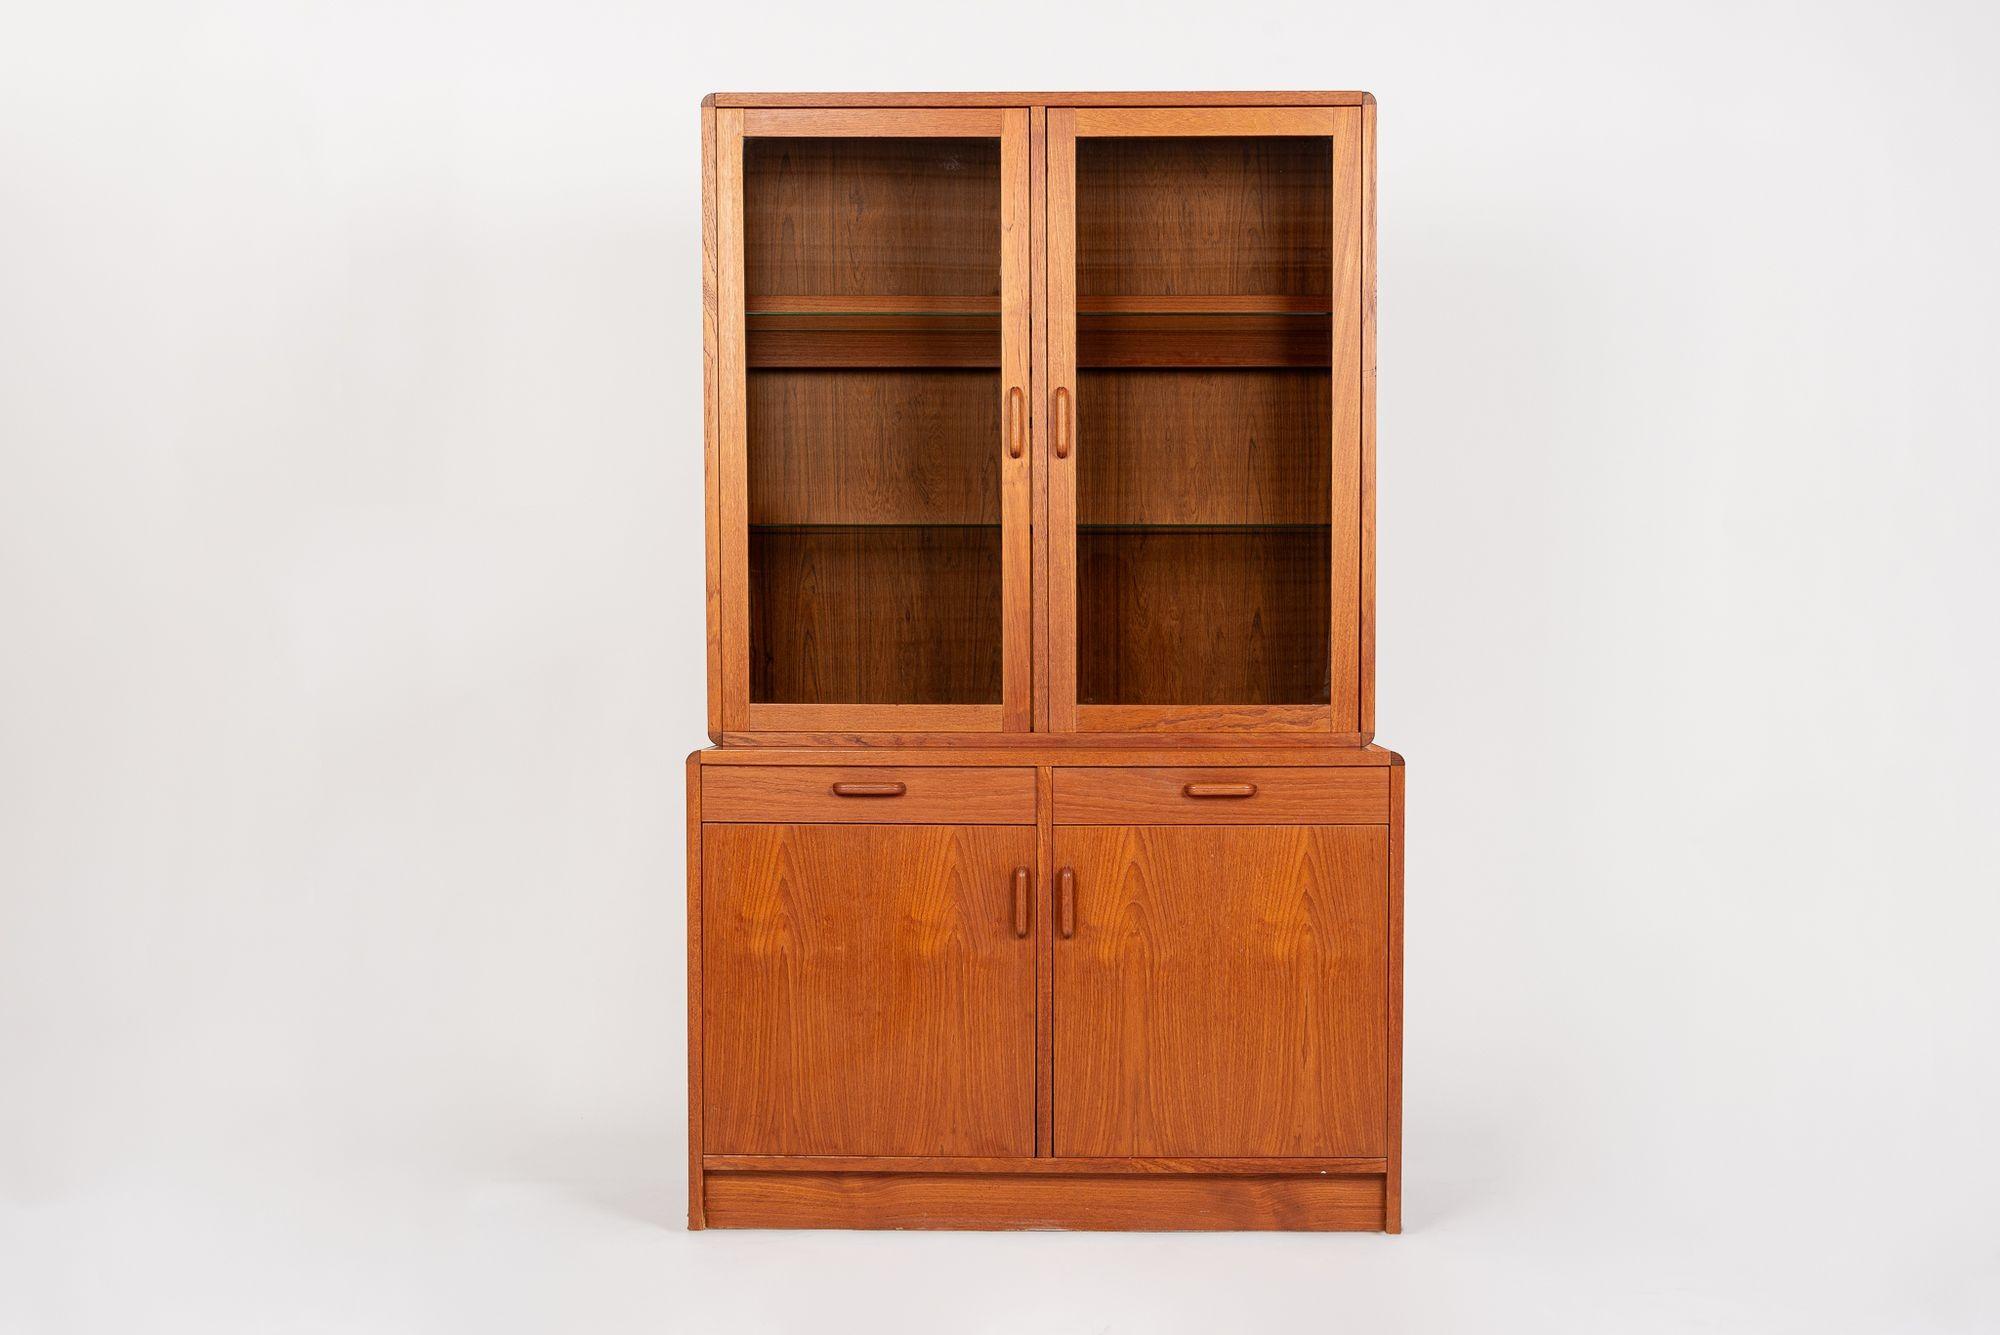 This vintage mid century modern step-back teak lighted china cabinet or display case wall unit was made in Denmark by STM Mobler circa 1970. This lovely cabinet is elegantly proportioned with clean, minimalist lines and is well-crafted from teak